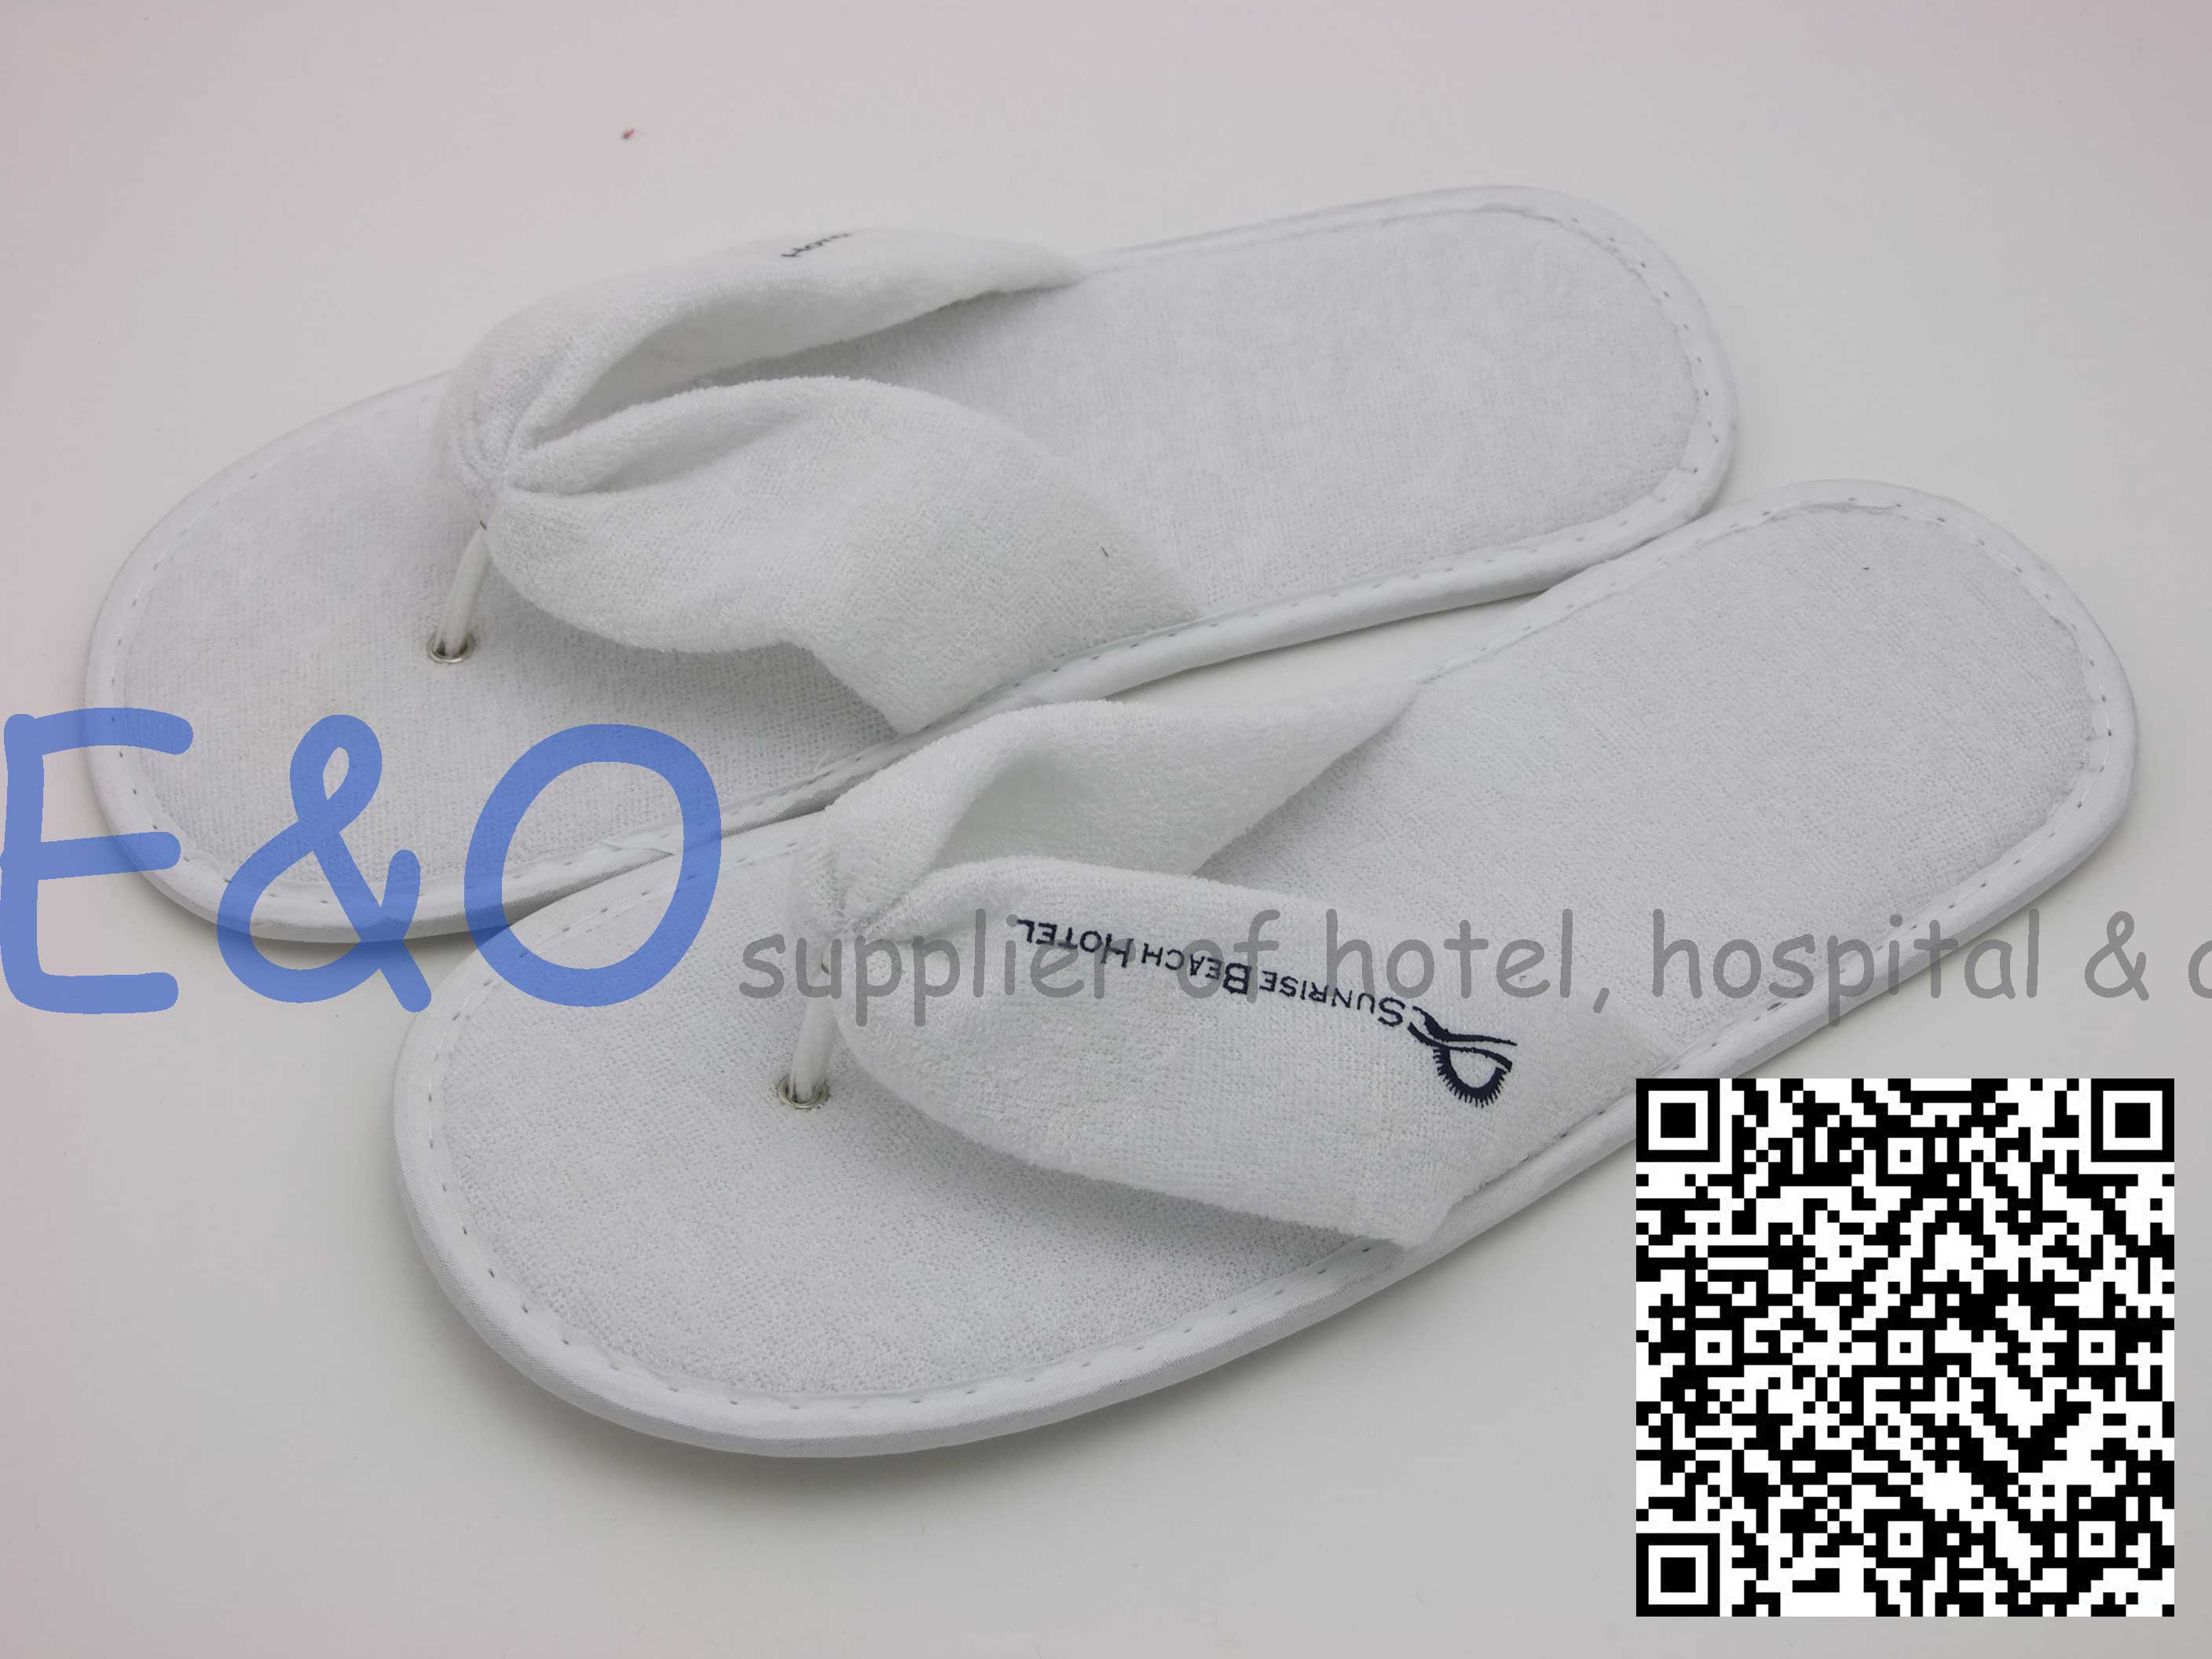 Hotel Flip Flops Slippers - Buy KEYWORD1 Product on E&O HOTEL SUPPLIES ...